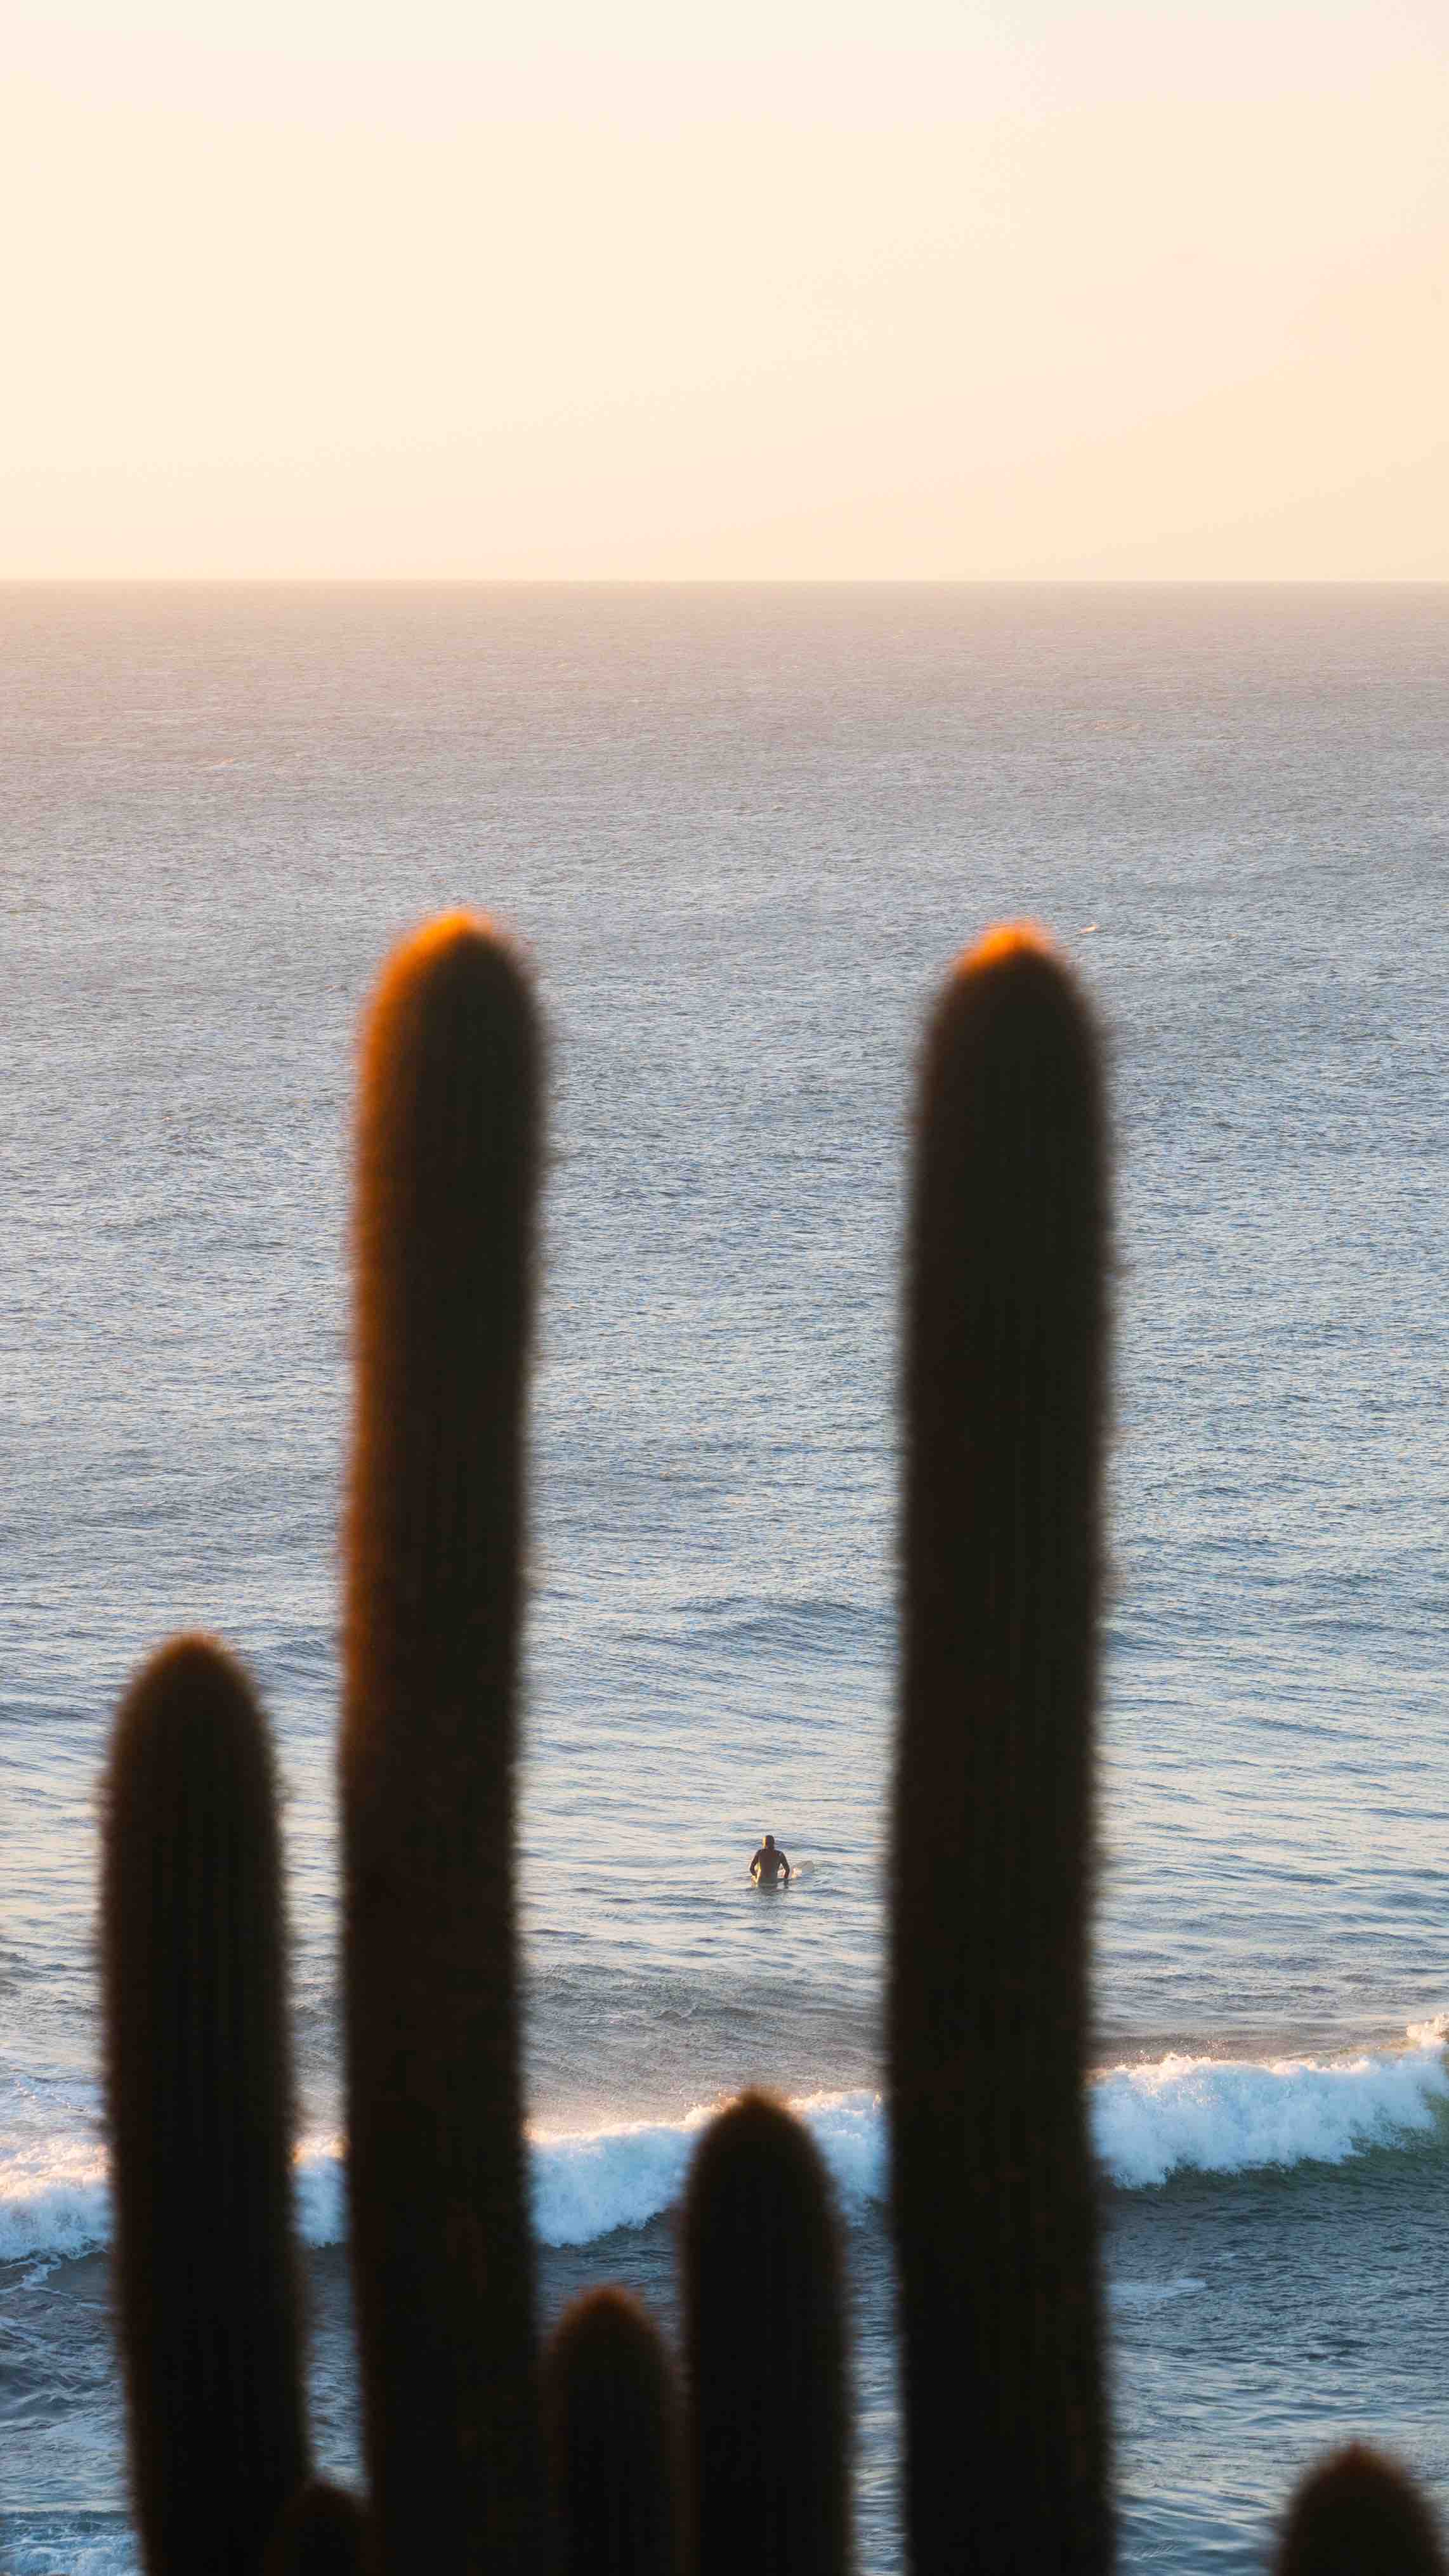 The ocean and some cacti